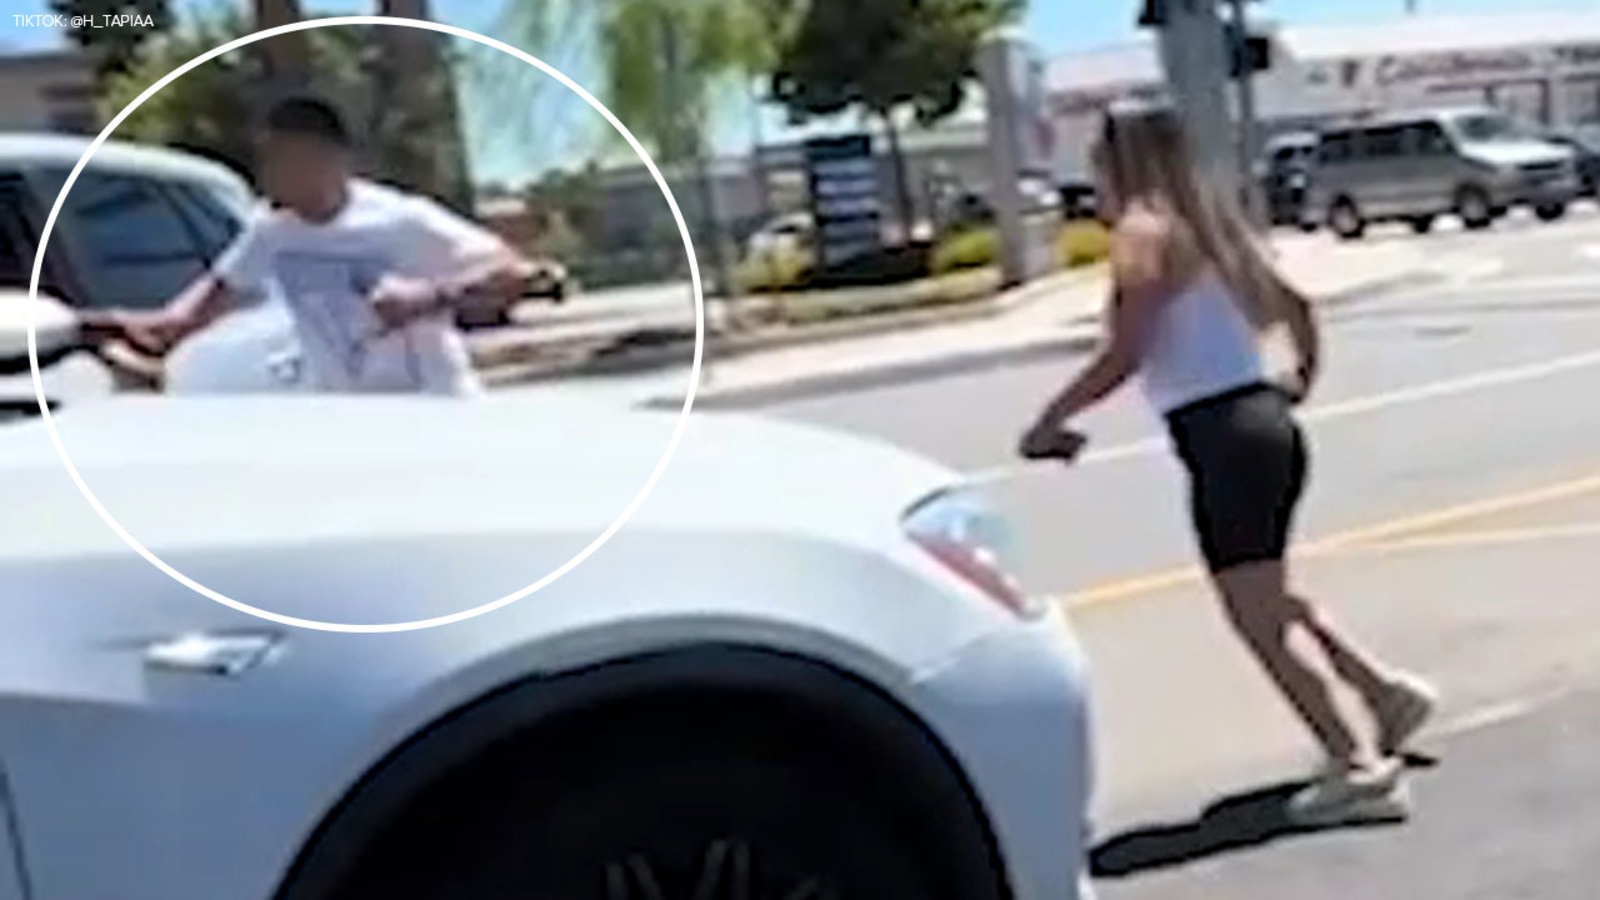 Driver stabs another motorist several times during escalating road rage fight in Ontario [Video]